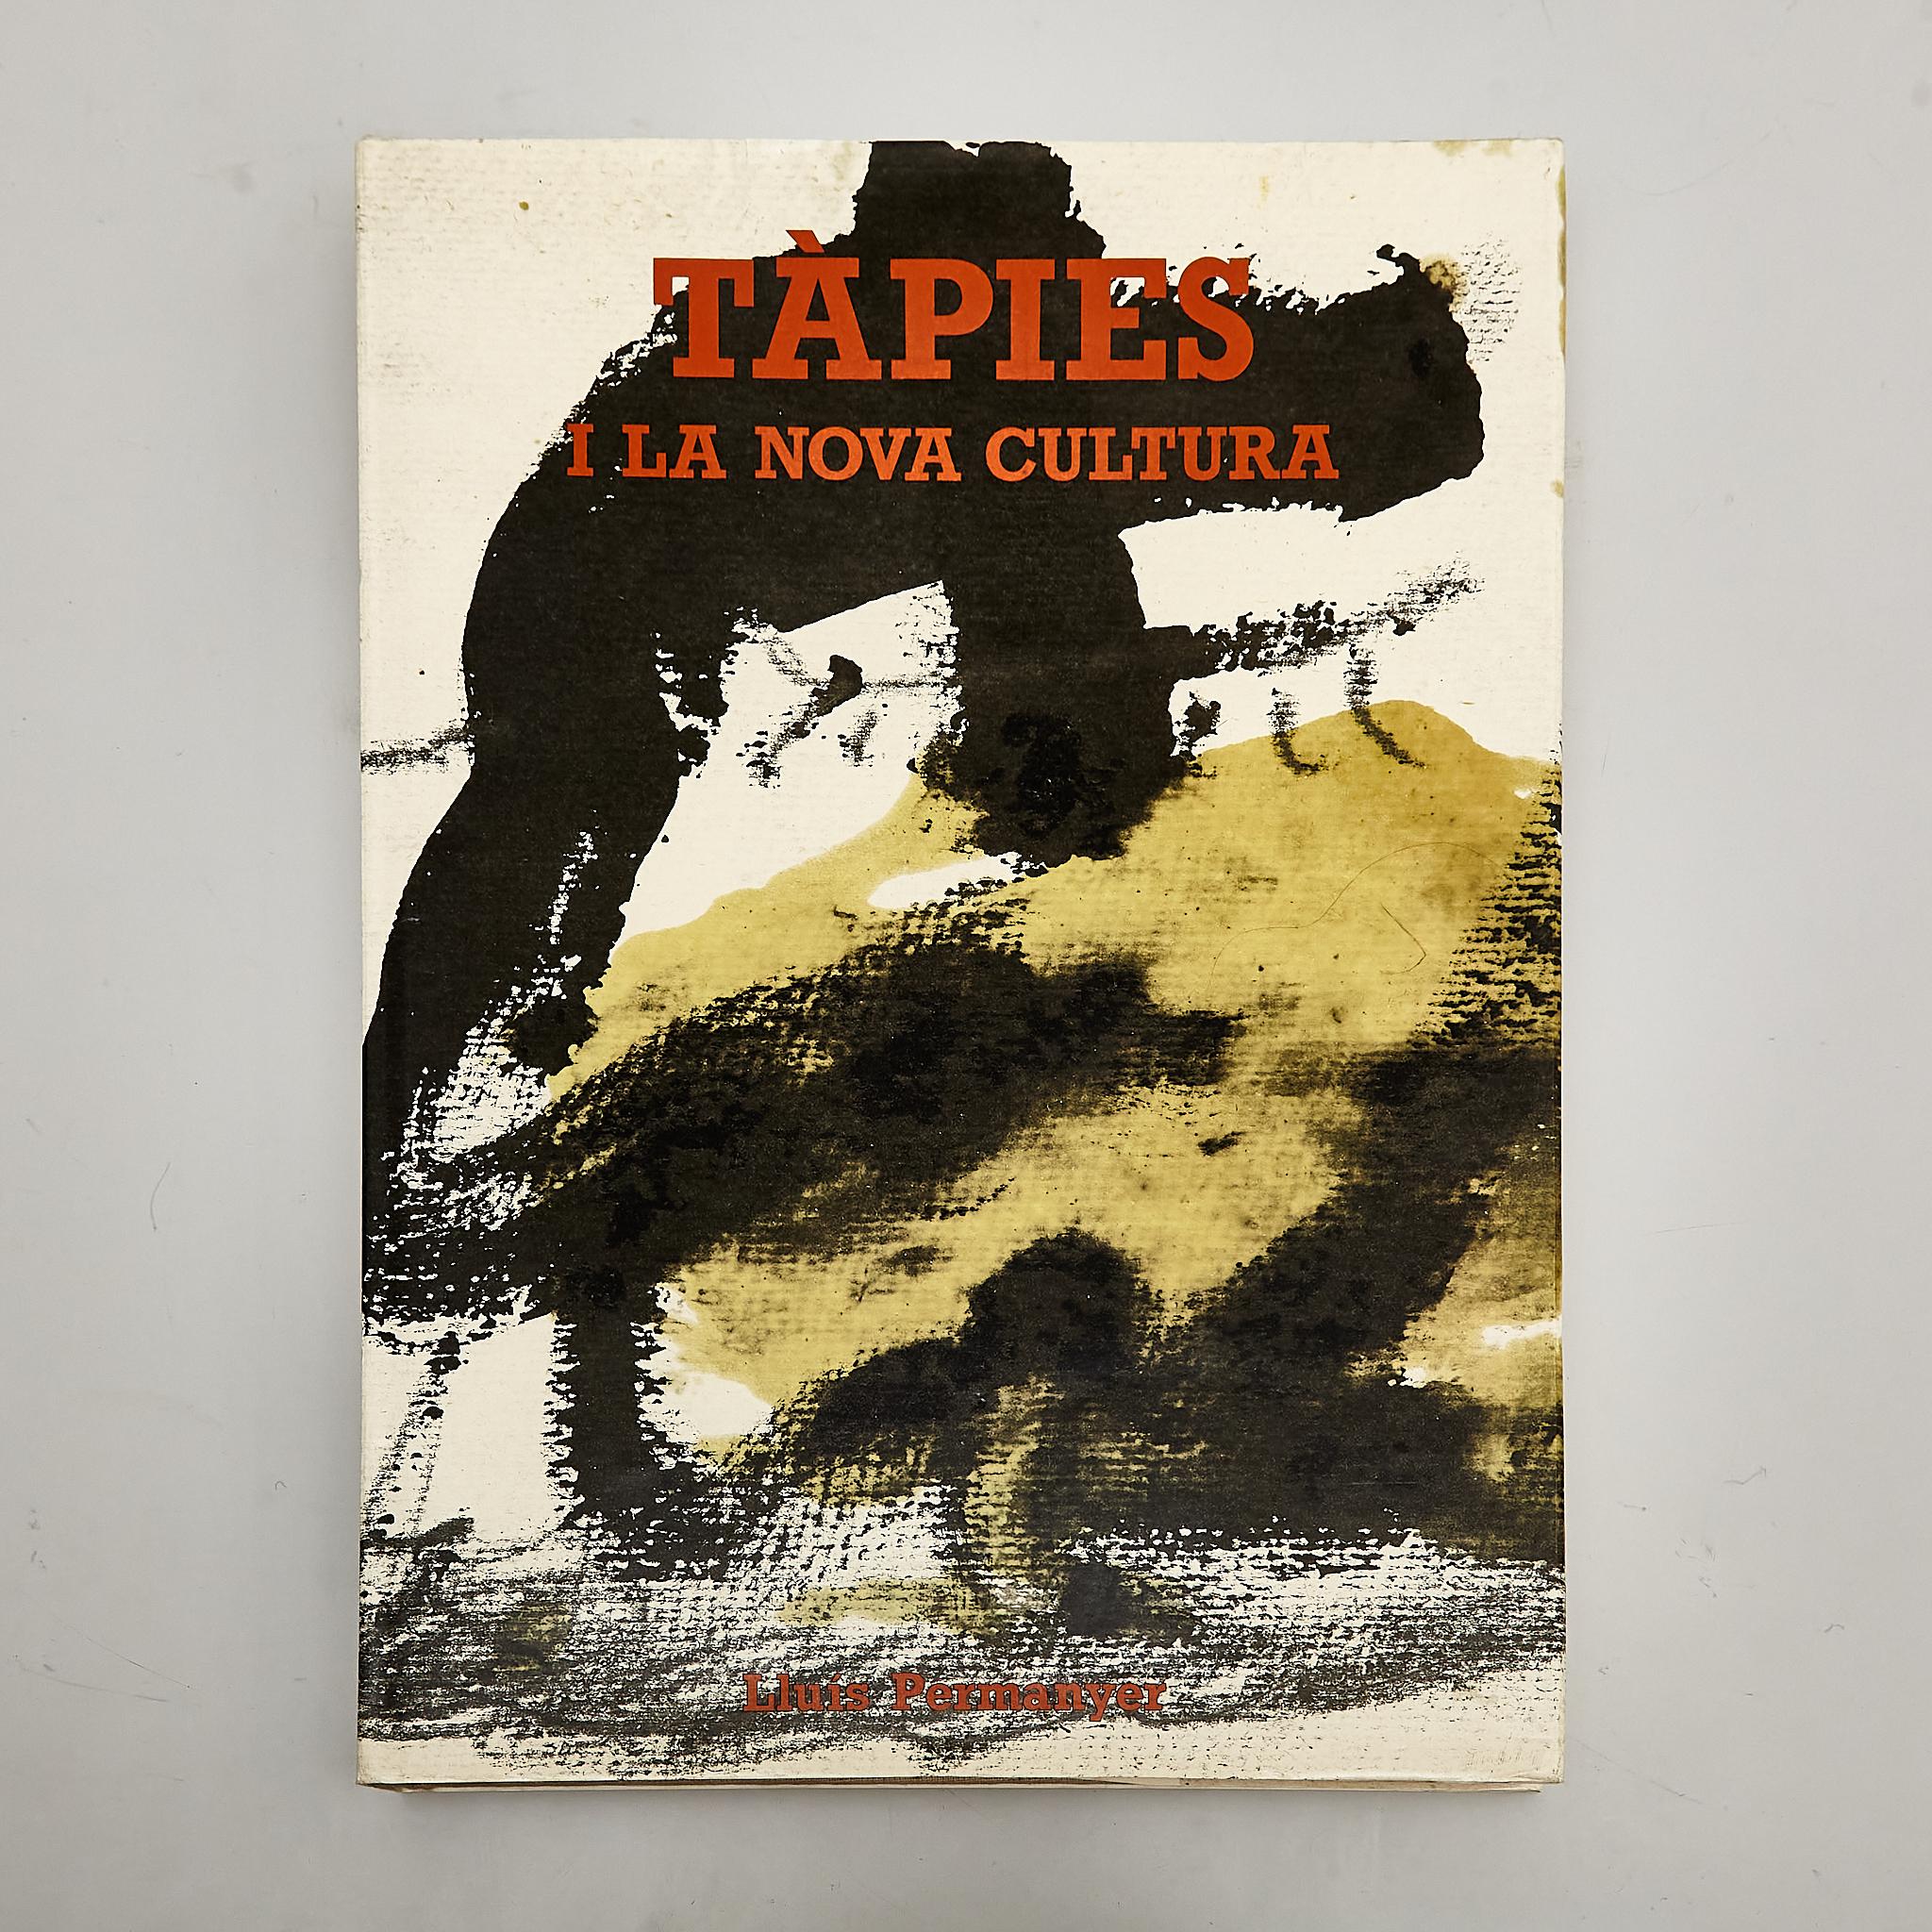 Explore the artistic genius of Antoni Tàpies with this remarkable 1986 book, titled 'Tapies i la Nova Cultura,' edited by Polígrafa. This is a special illustrated edition, encapsulating the essence of Tàpies' innovative work.

In good original